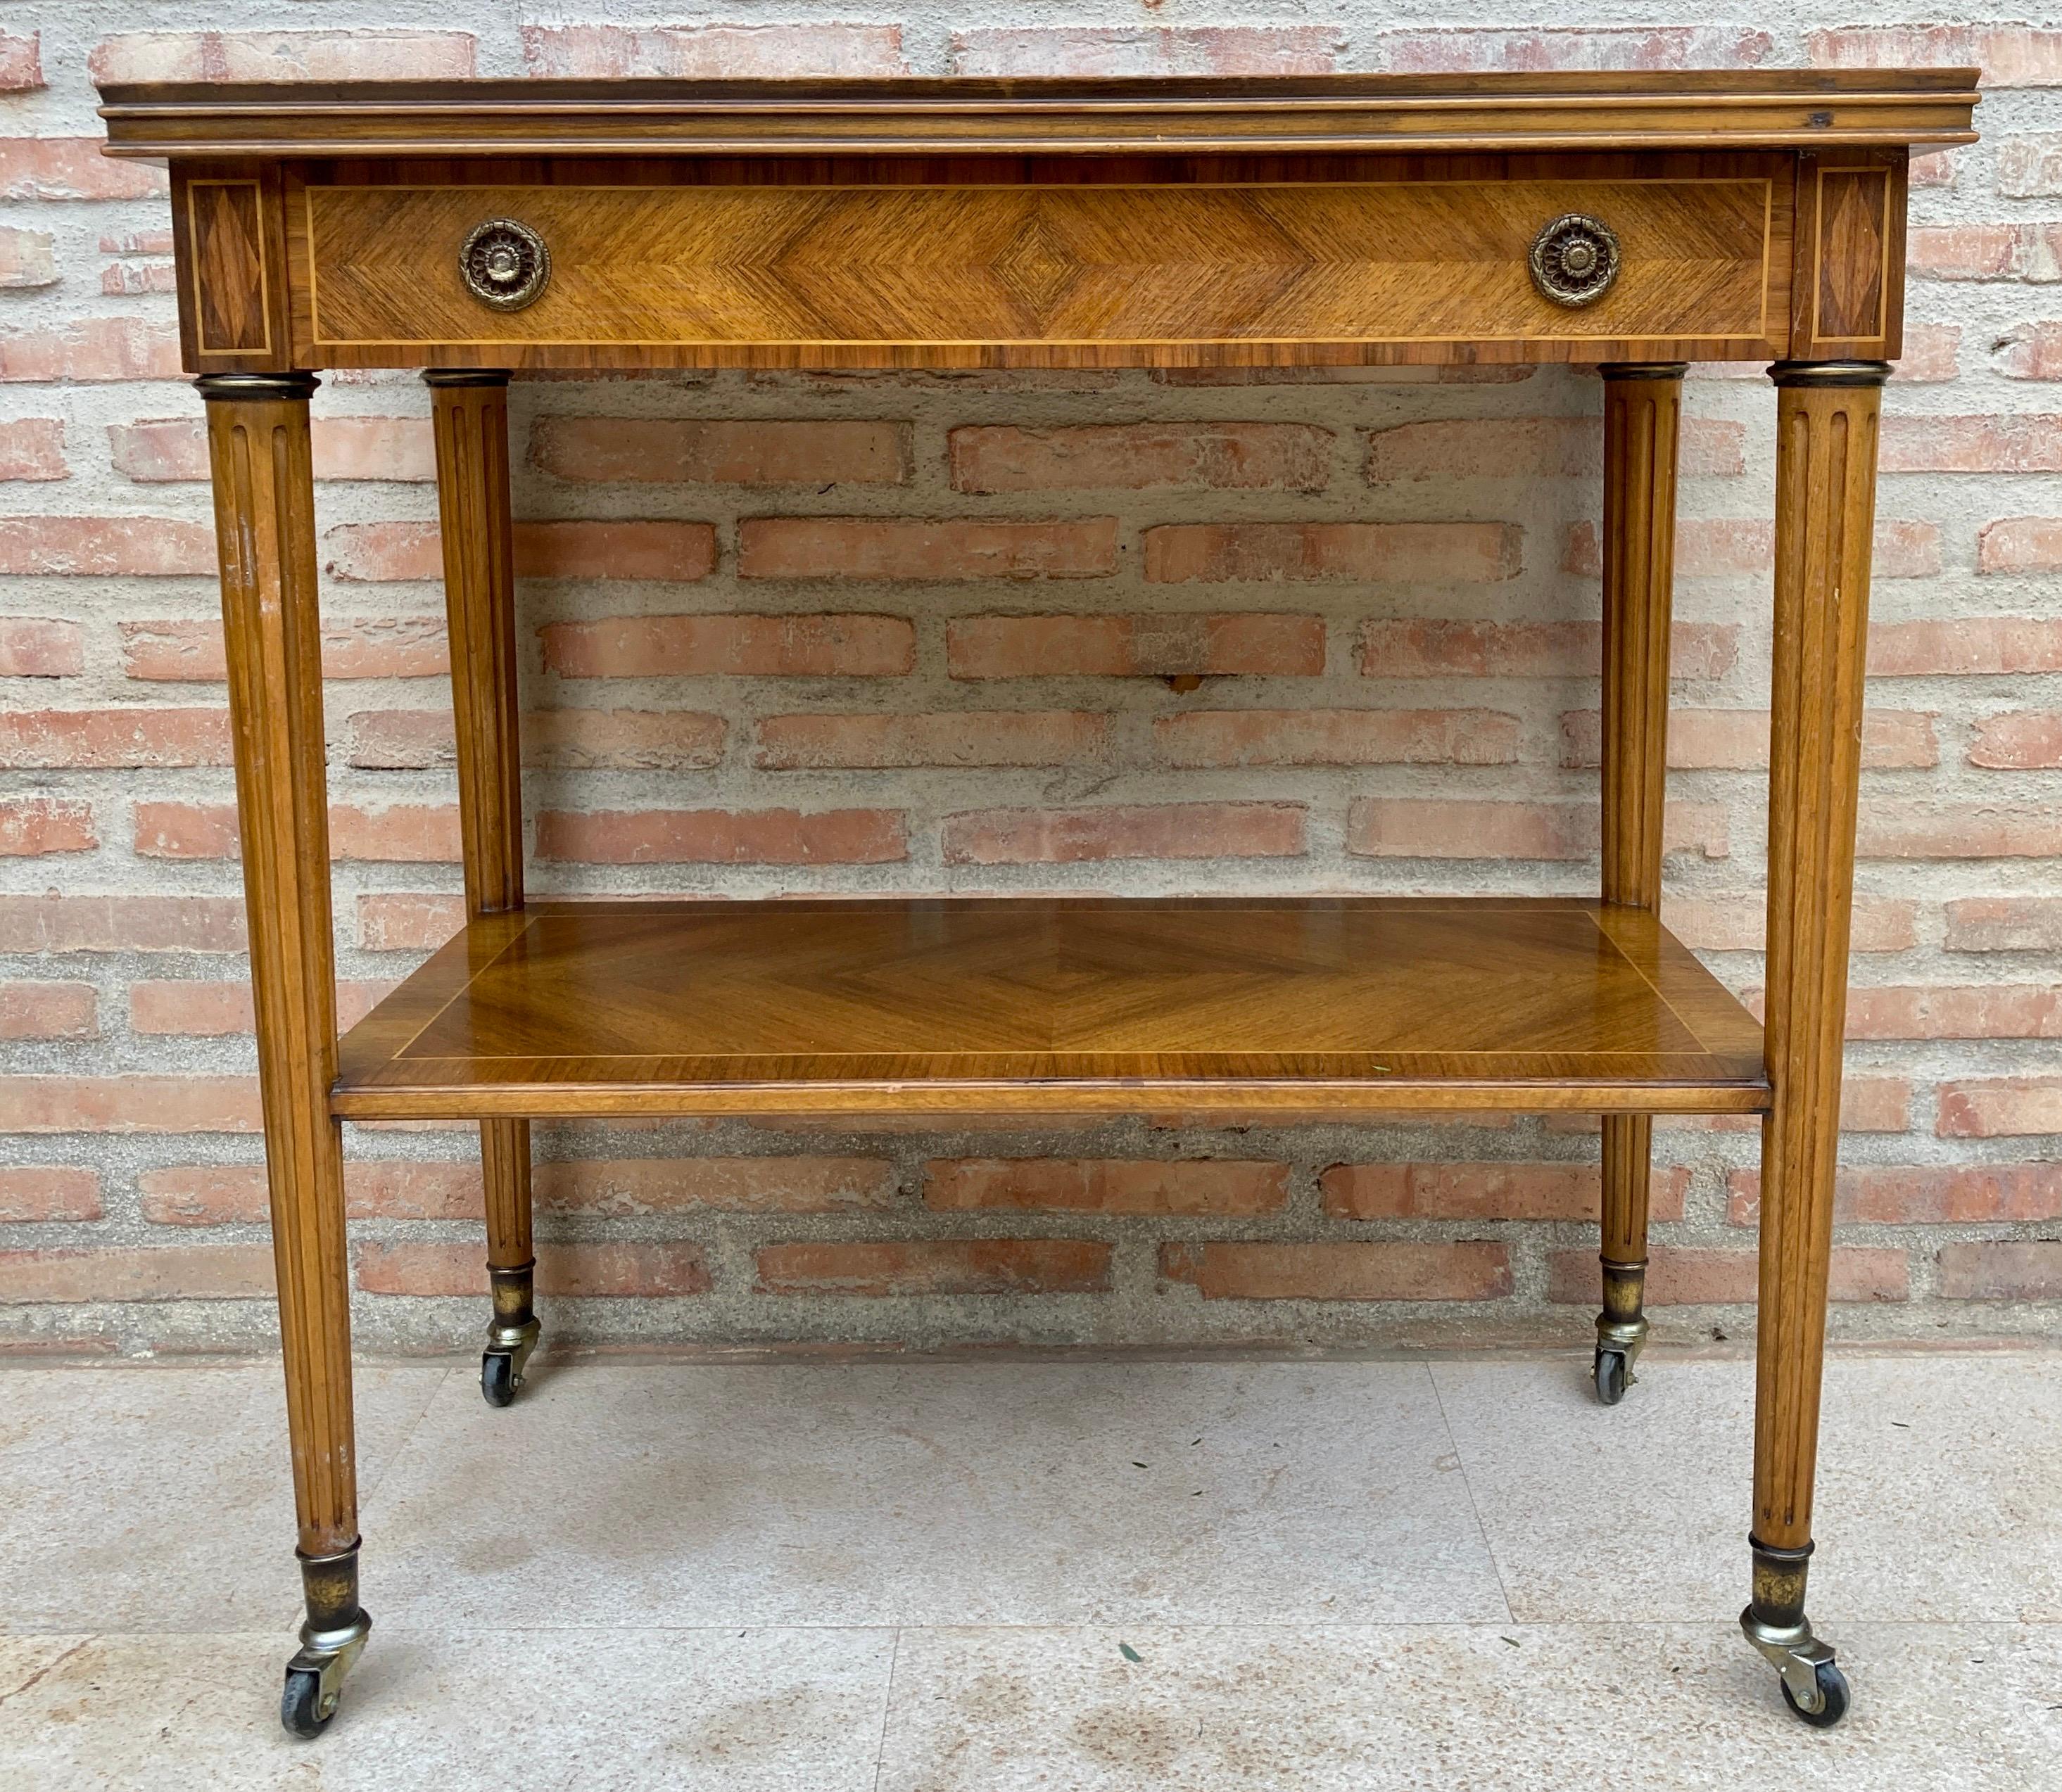 Neoclassic French Marquetry Side Table With One Drawer And Wheels 1940s In Good Condition For Sale In Miami, FL